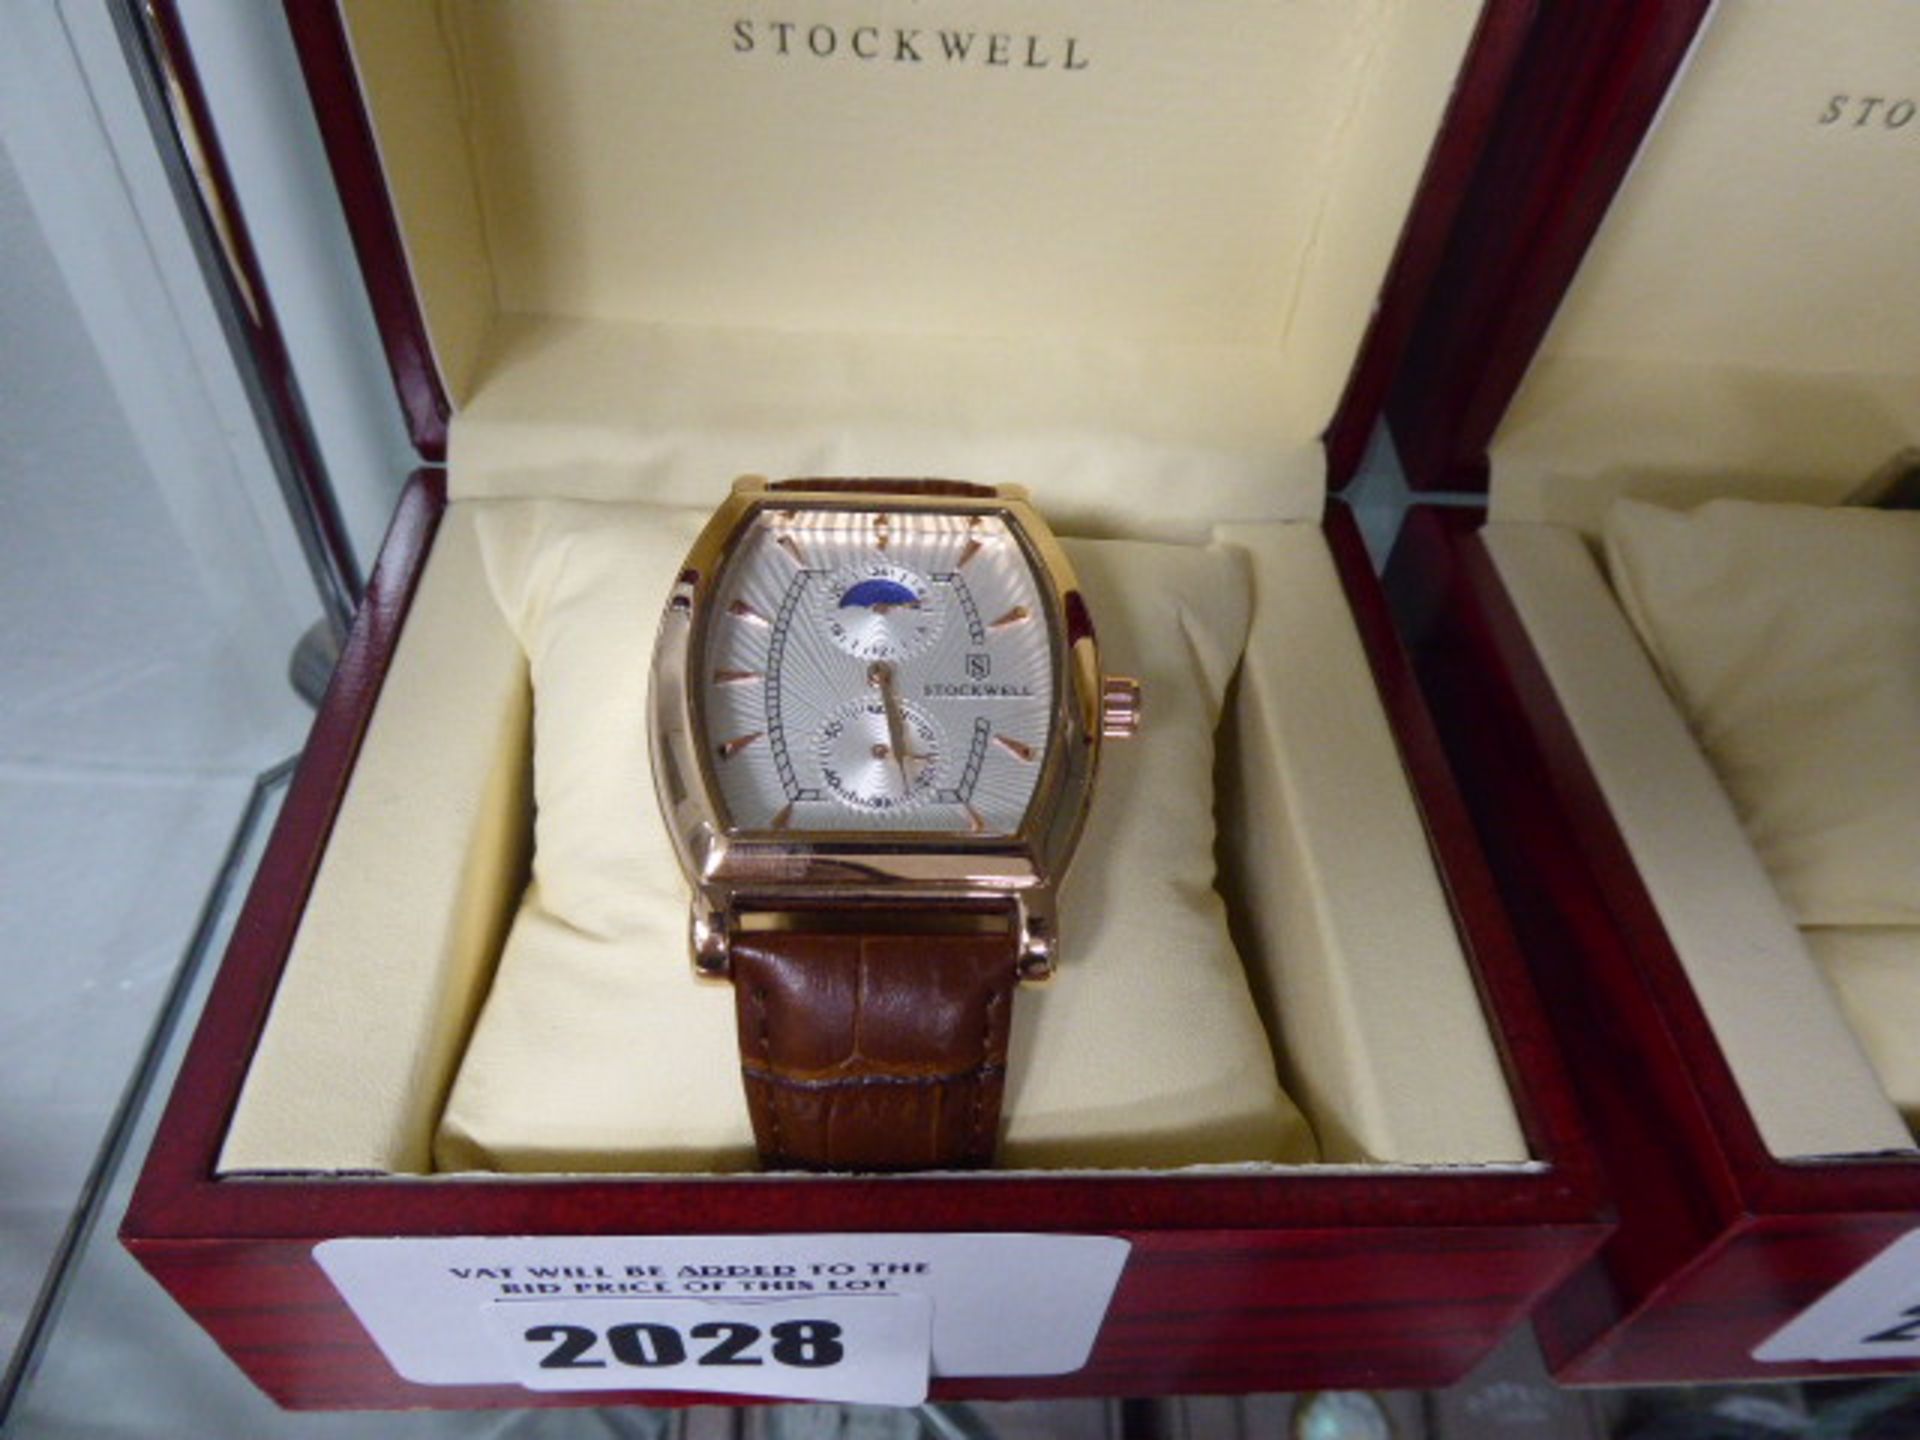 Stockwell moon face style gents wristwatch with brown leather strap and case